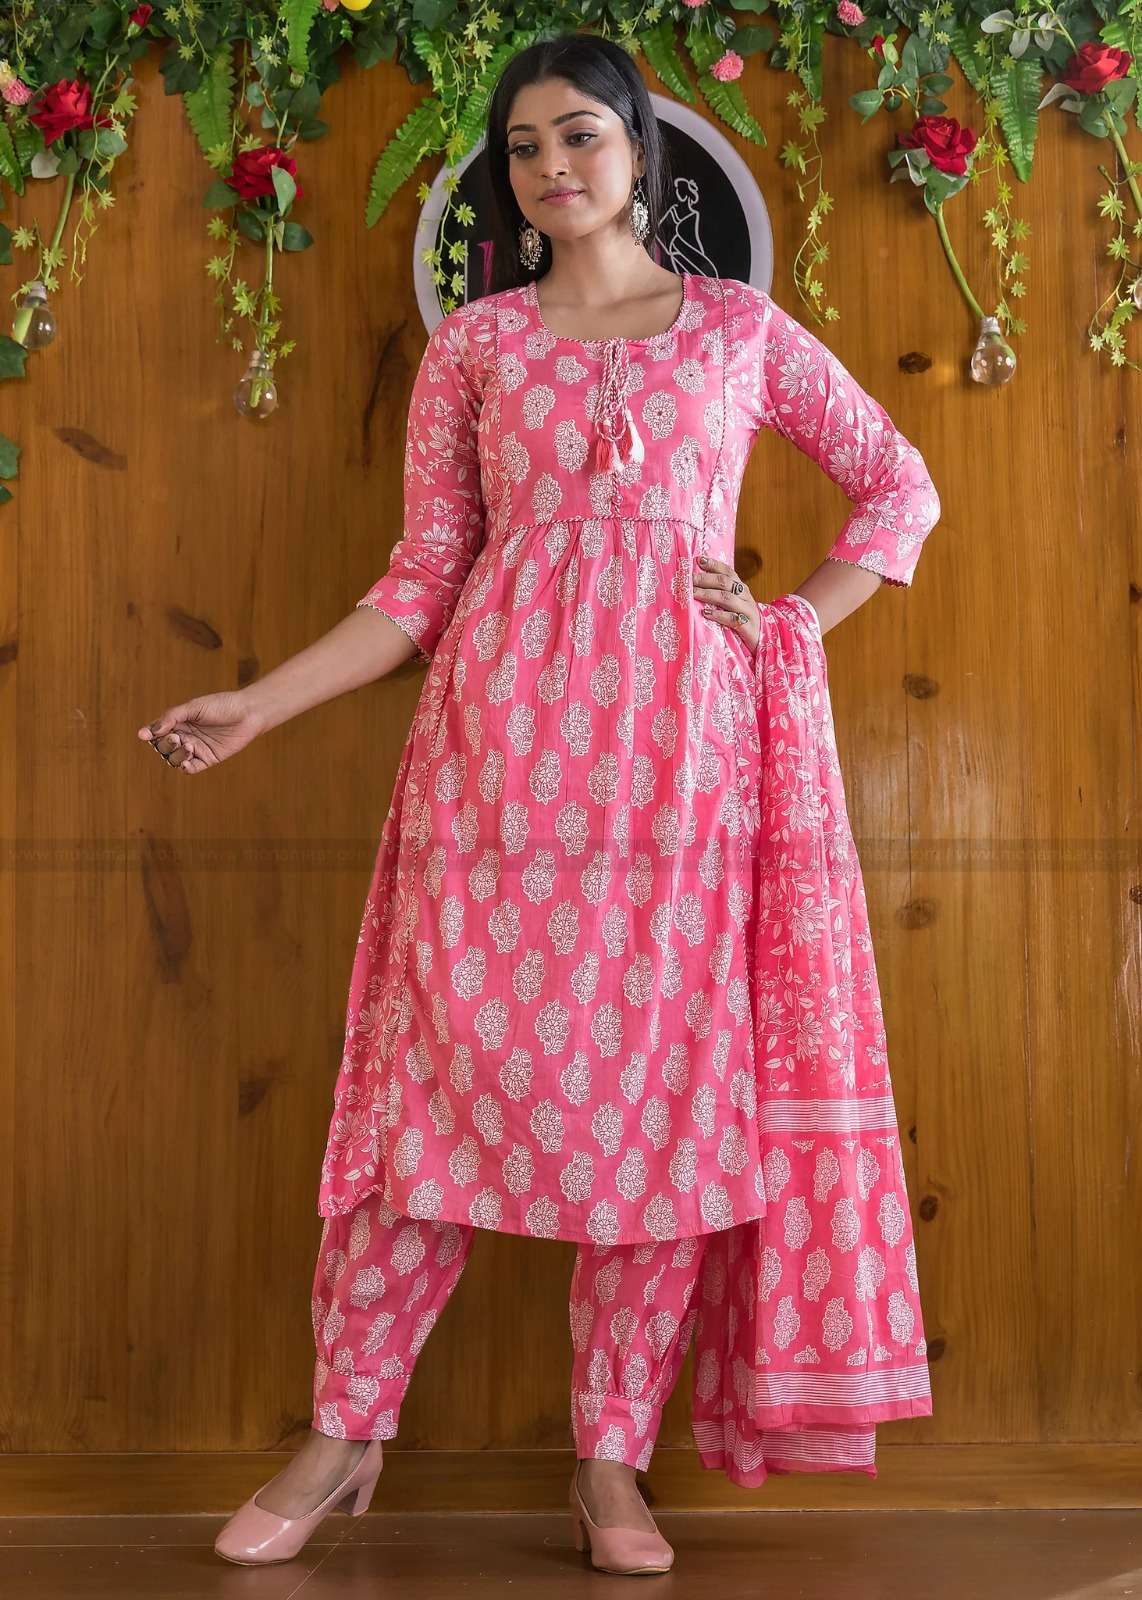 pink suit pure cotton special offer for a festive gathering pink floral afghani suit set which is decorated with finest embroidery and motifs. it is paired with matching afghani pants and dupatta 